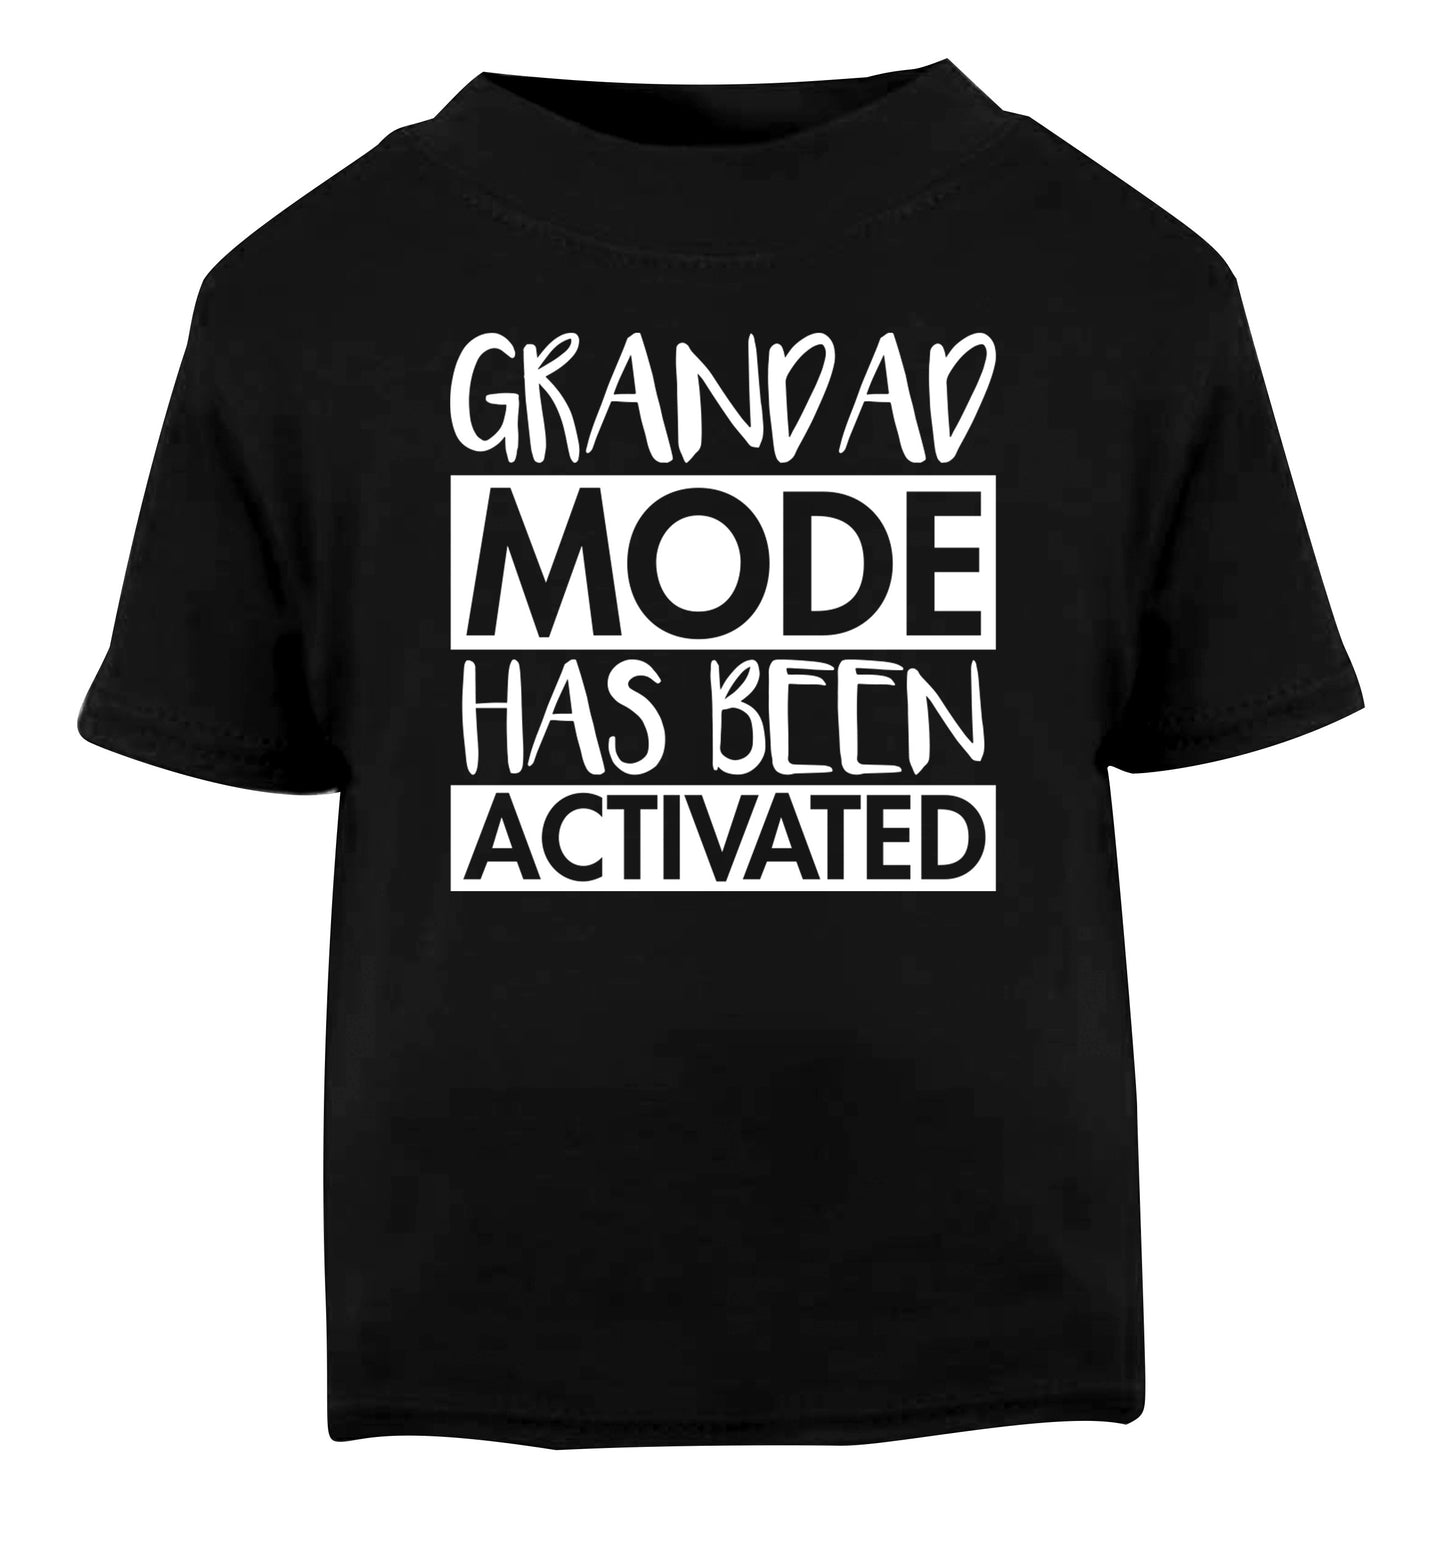 Grandad mode activated Black Baby Toddler Tshirt 2 years